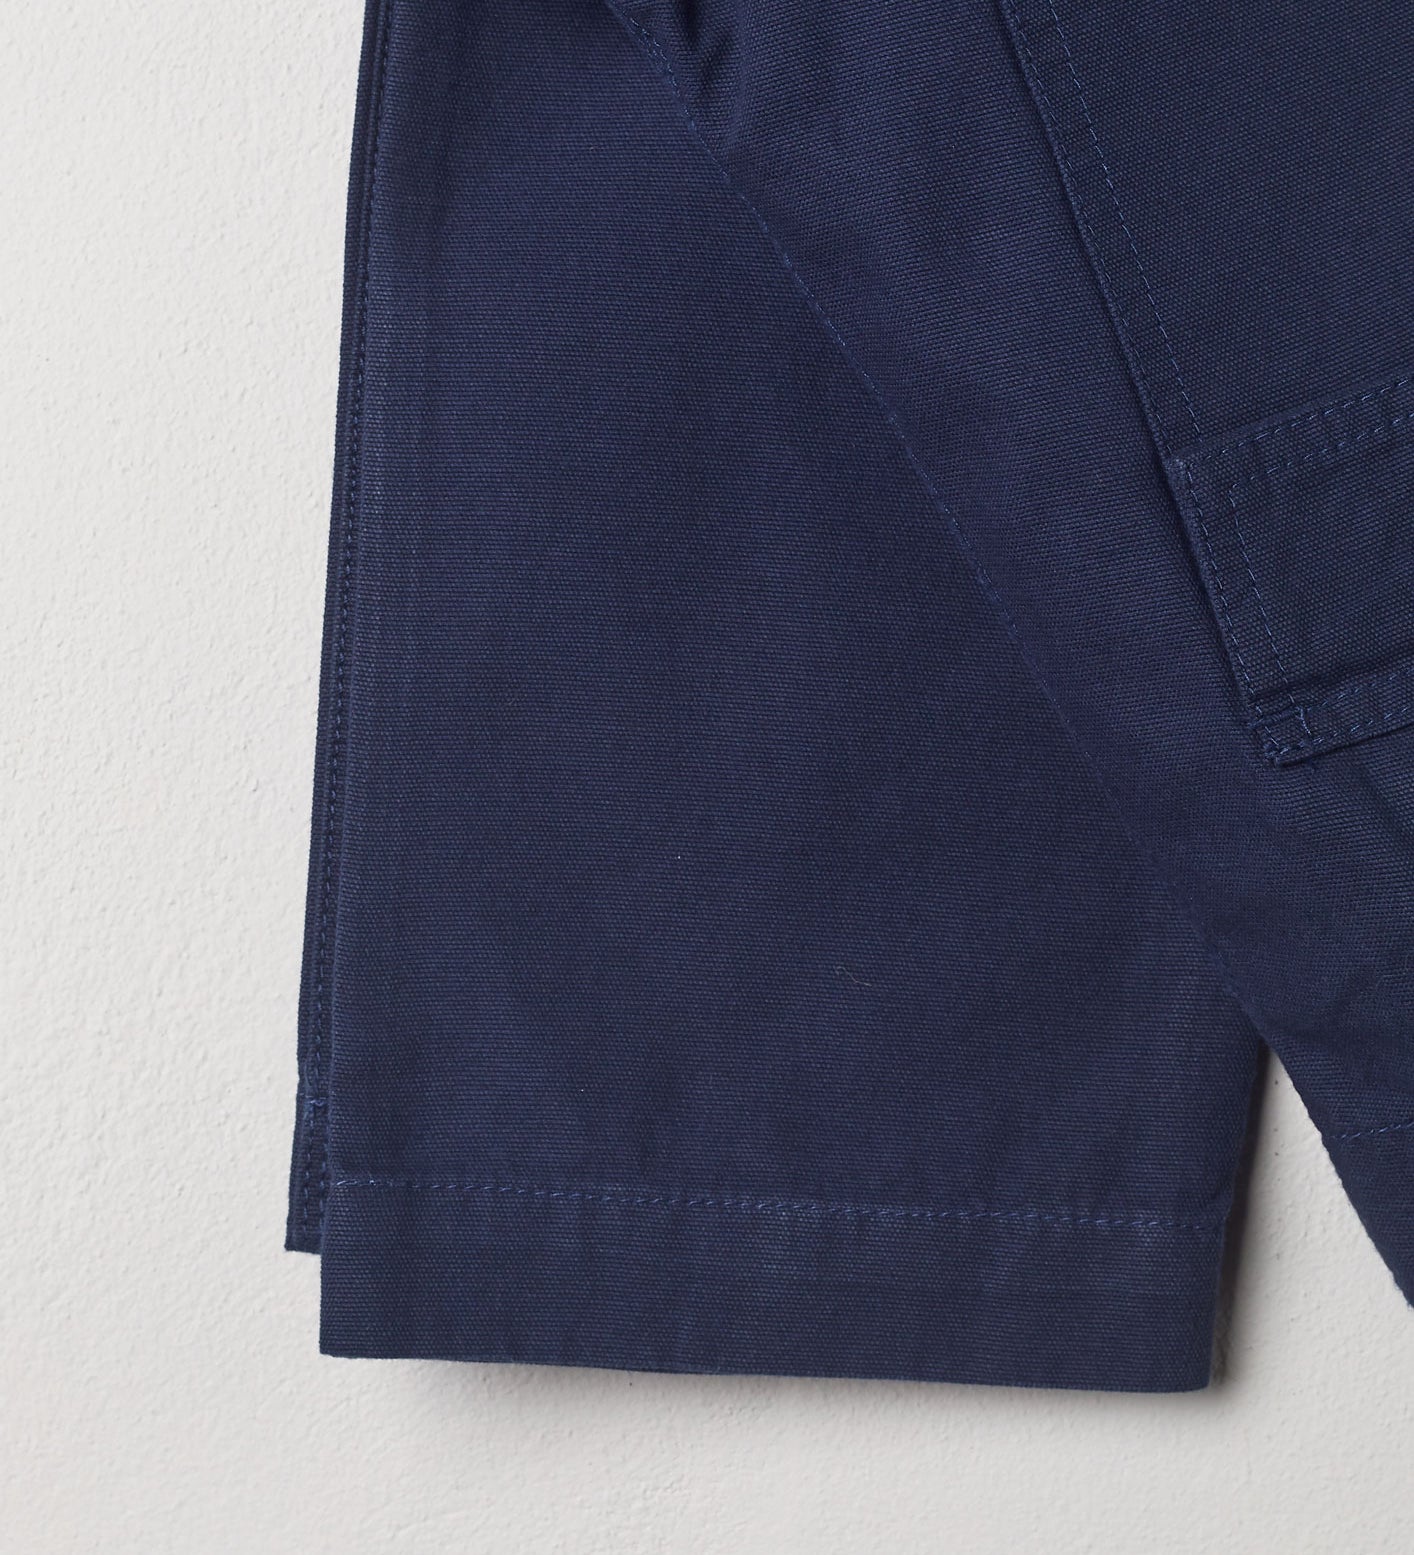 Close-up view of #5005 Uskees organic cotton workwear pants in navy showing triple stitching.